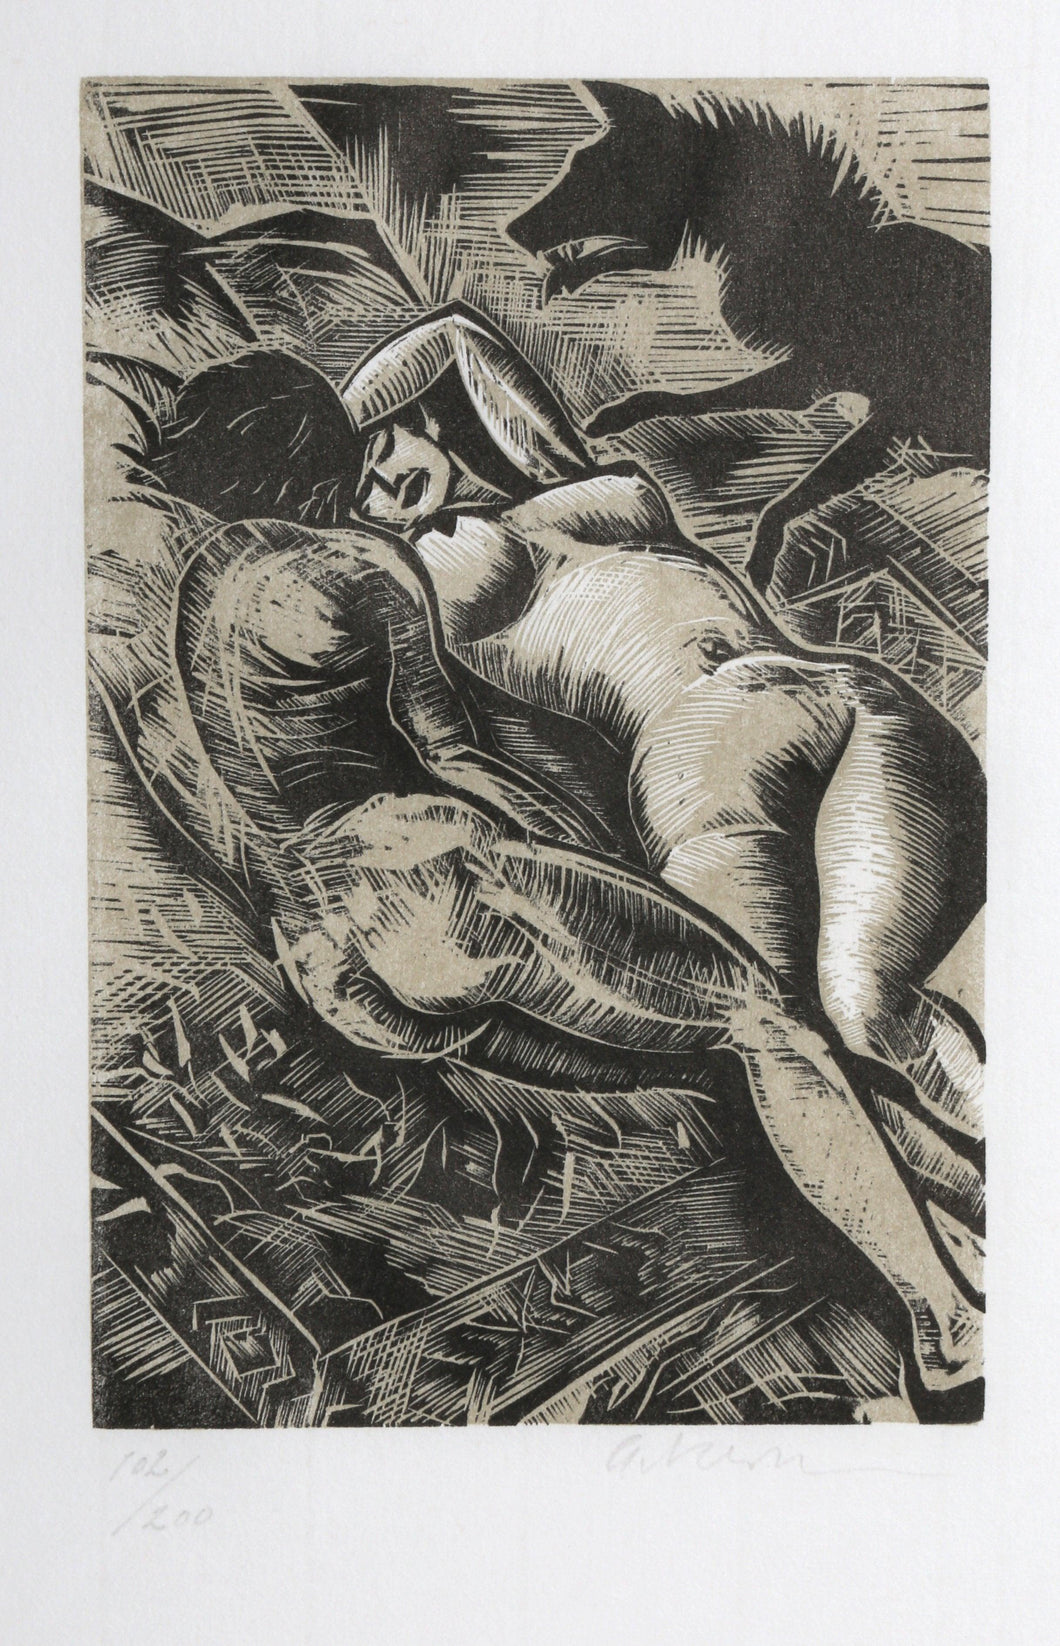 On a Rug Lay Two Naked Figures from Steppenwolf Portfolio Woodcut | Helmut Ackermann,{{product.type}}